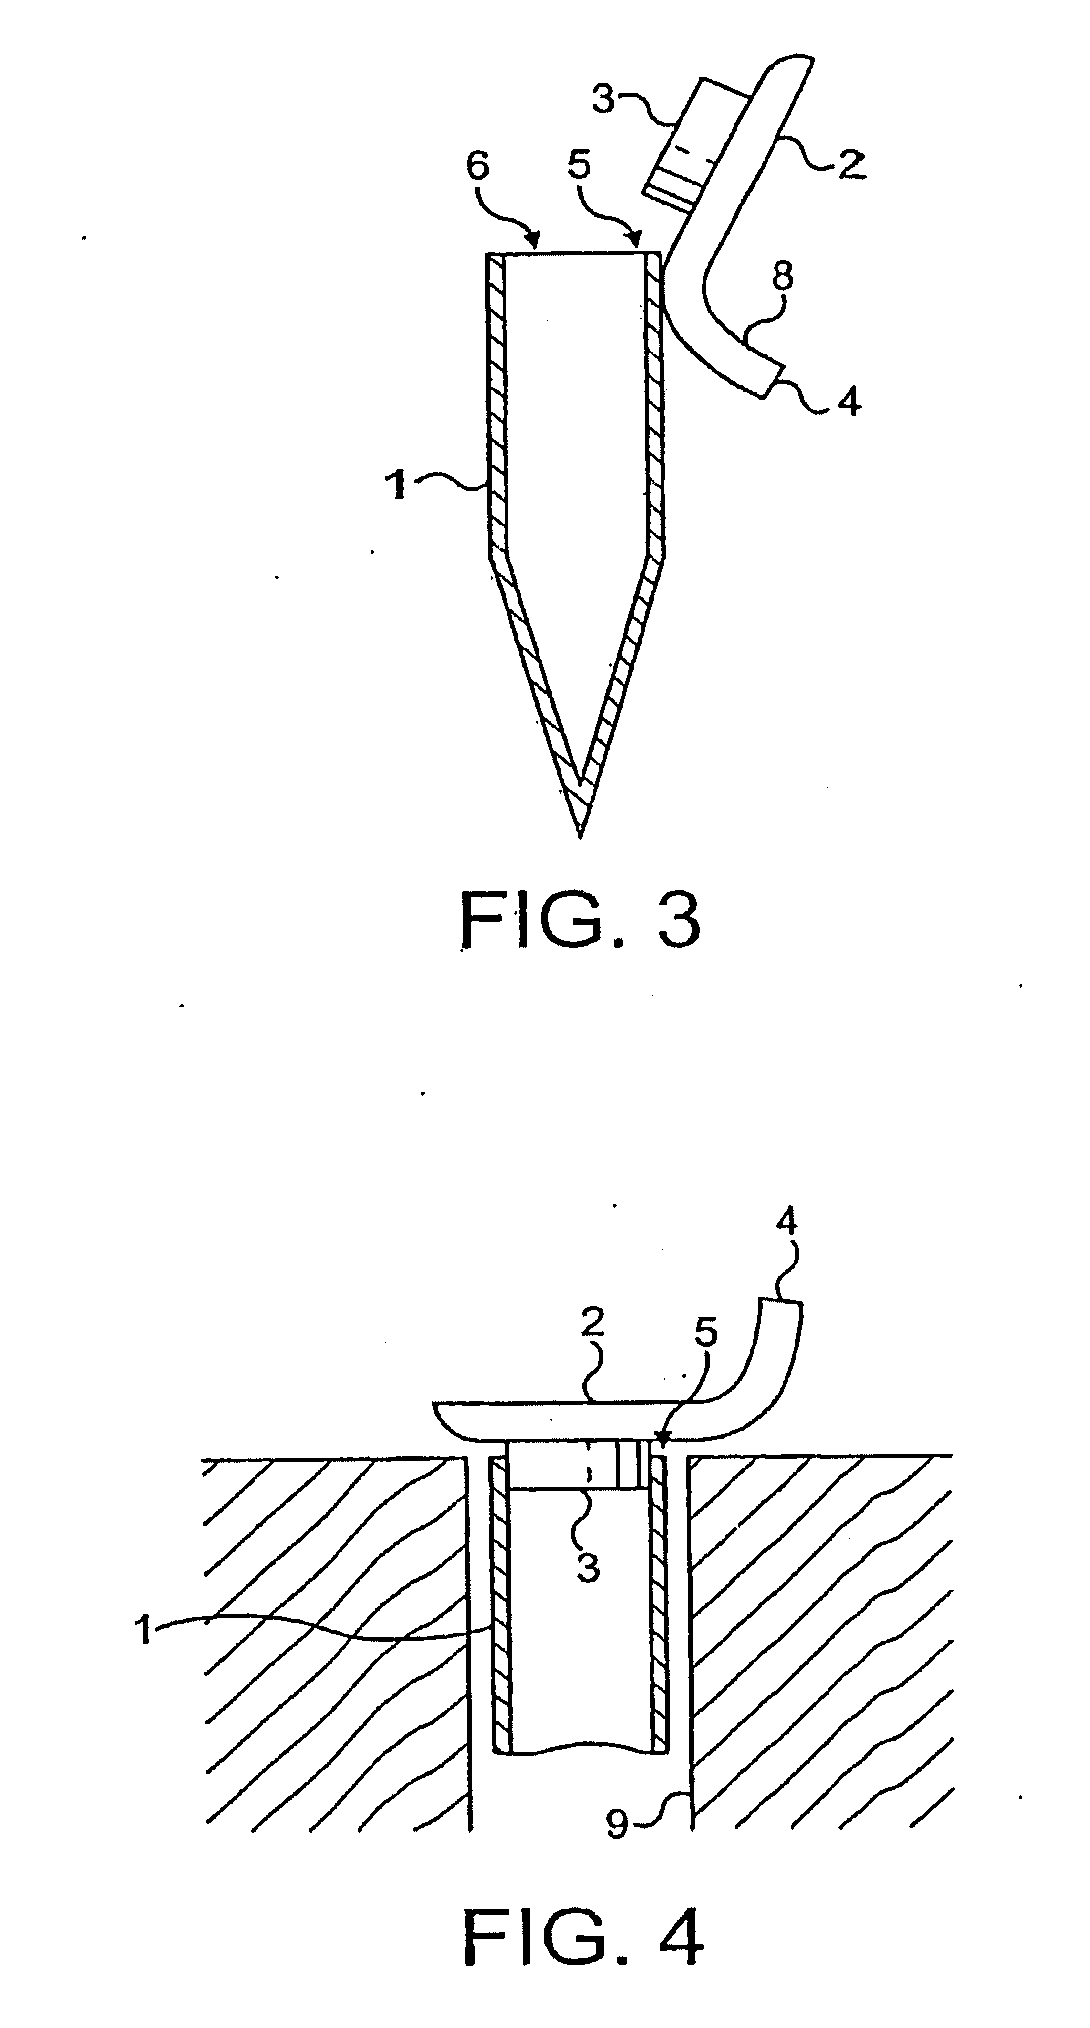 Microtube with lid opening mechanism